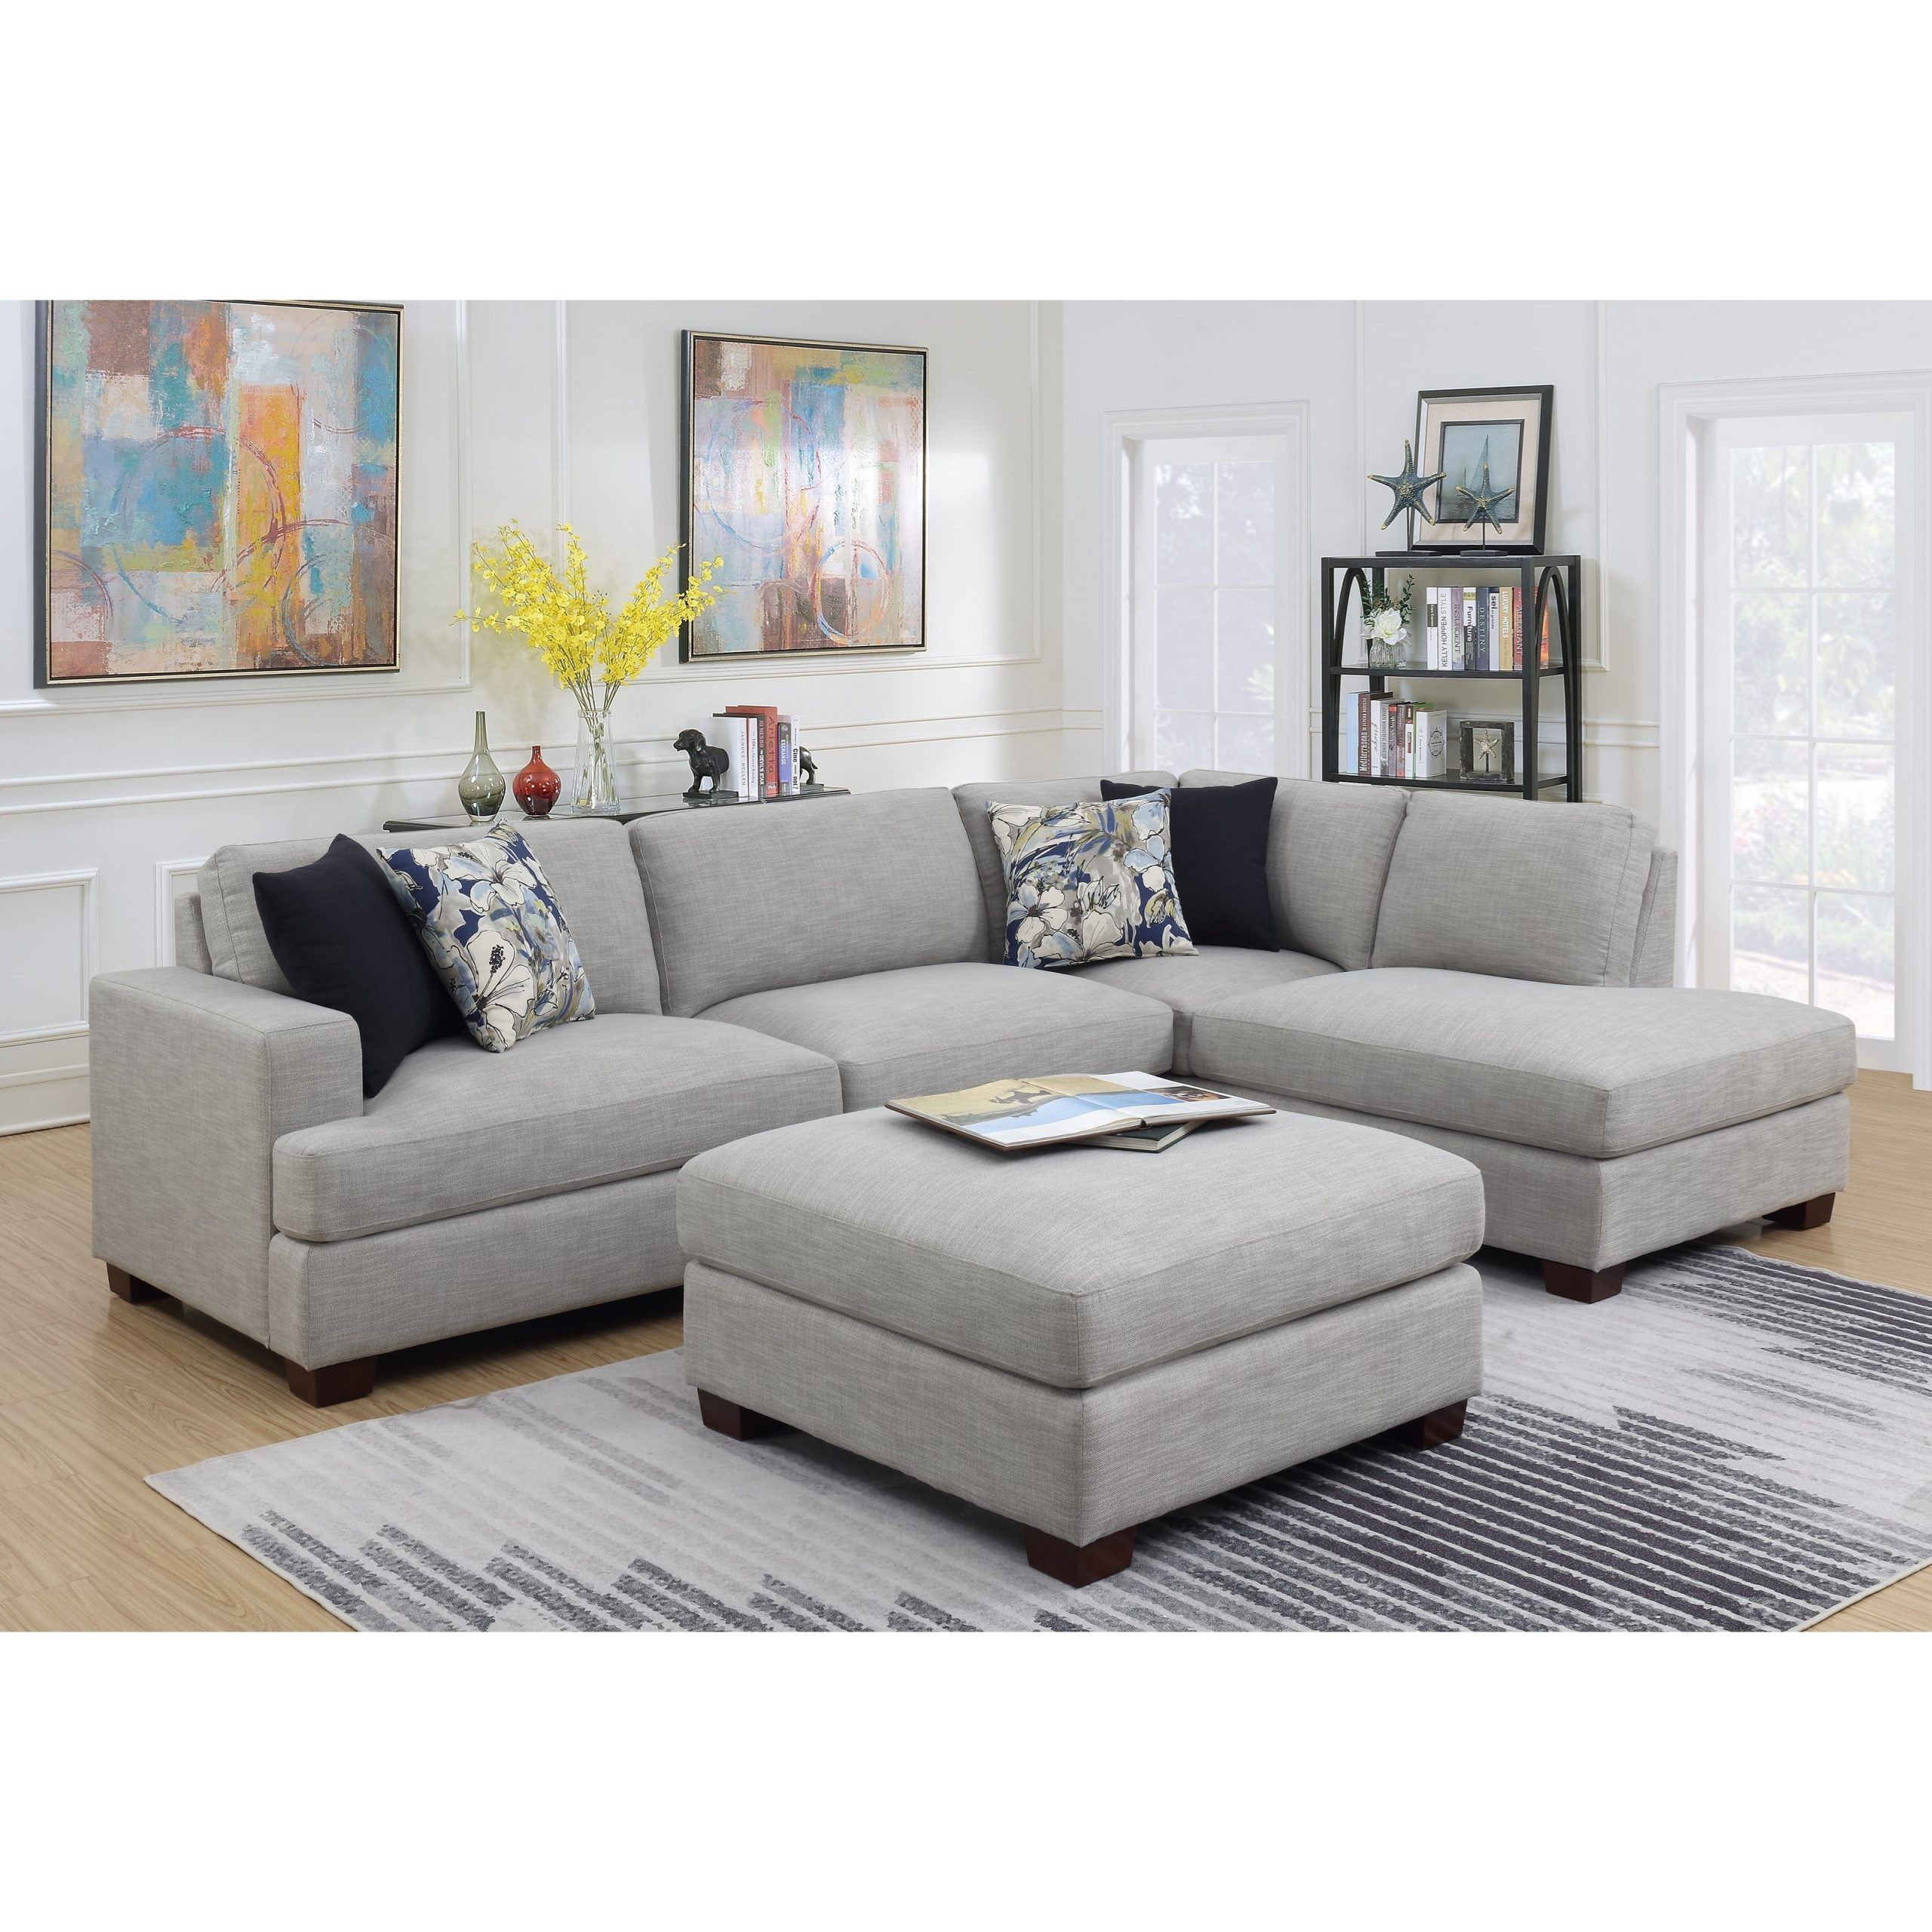 Emerald Vernon Contemporary 2 Piece Sectional Sofa With Throughout 2pc Burland Contemporary Chaise Sectional Sofas (Photo 1 of 15)